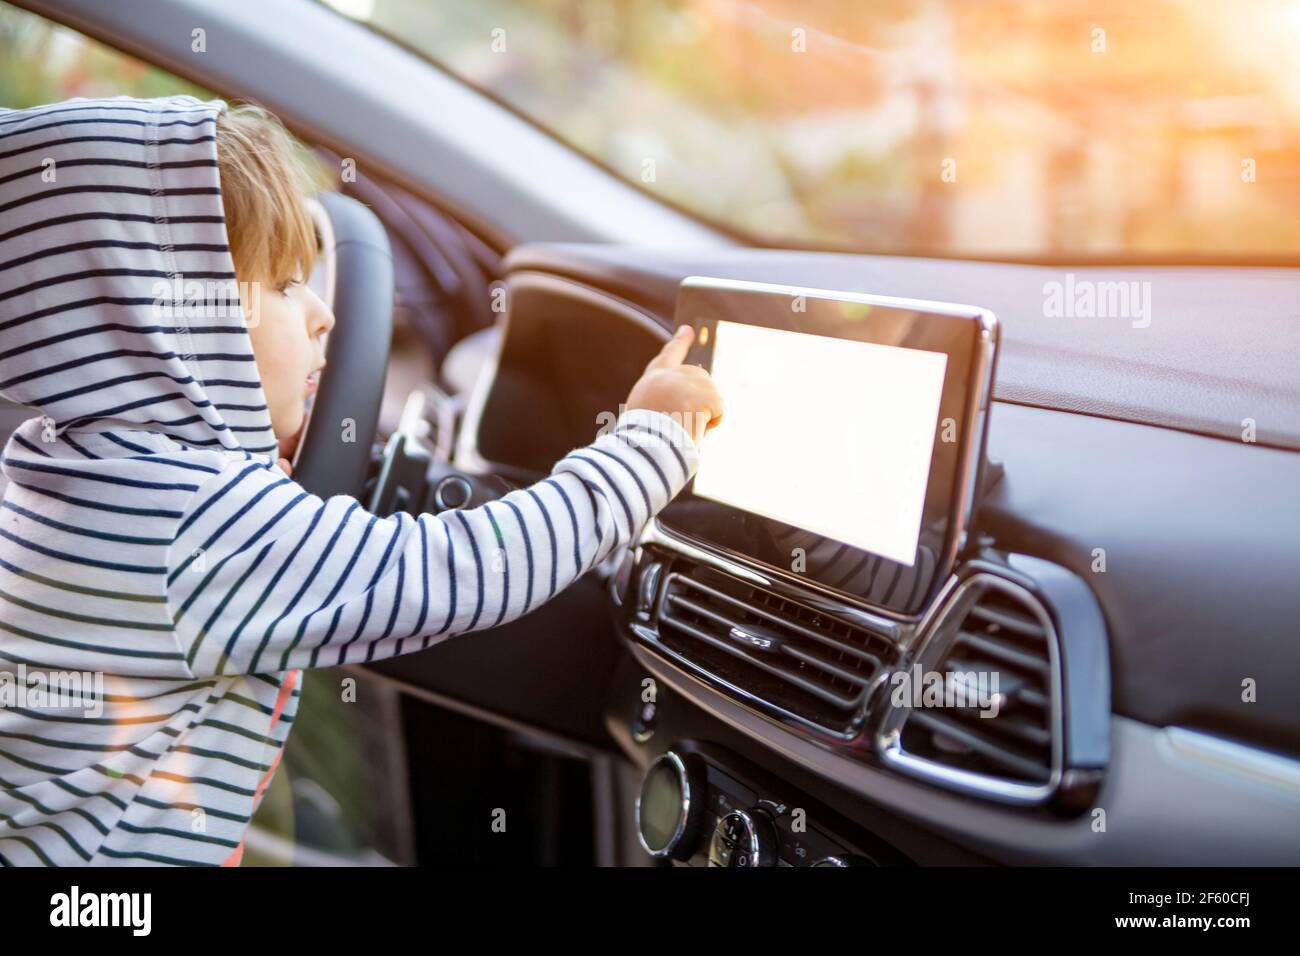 curious toddler girl holding, touching, and turning a car mnultiedia touch screen player button. empty white screen Stock Photo